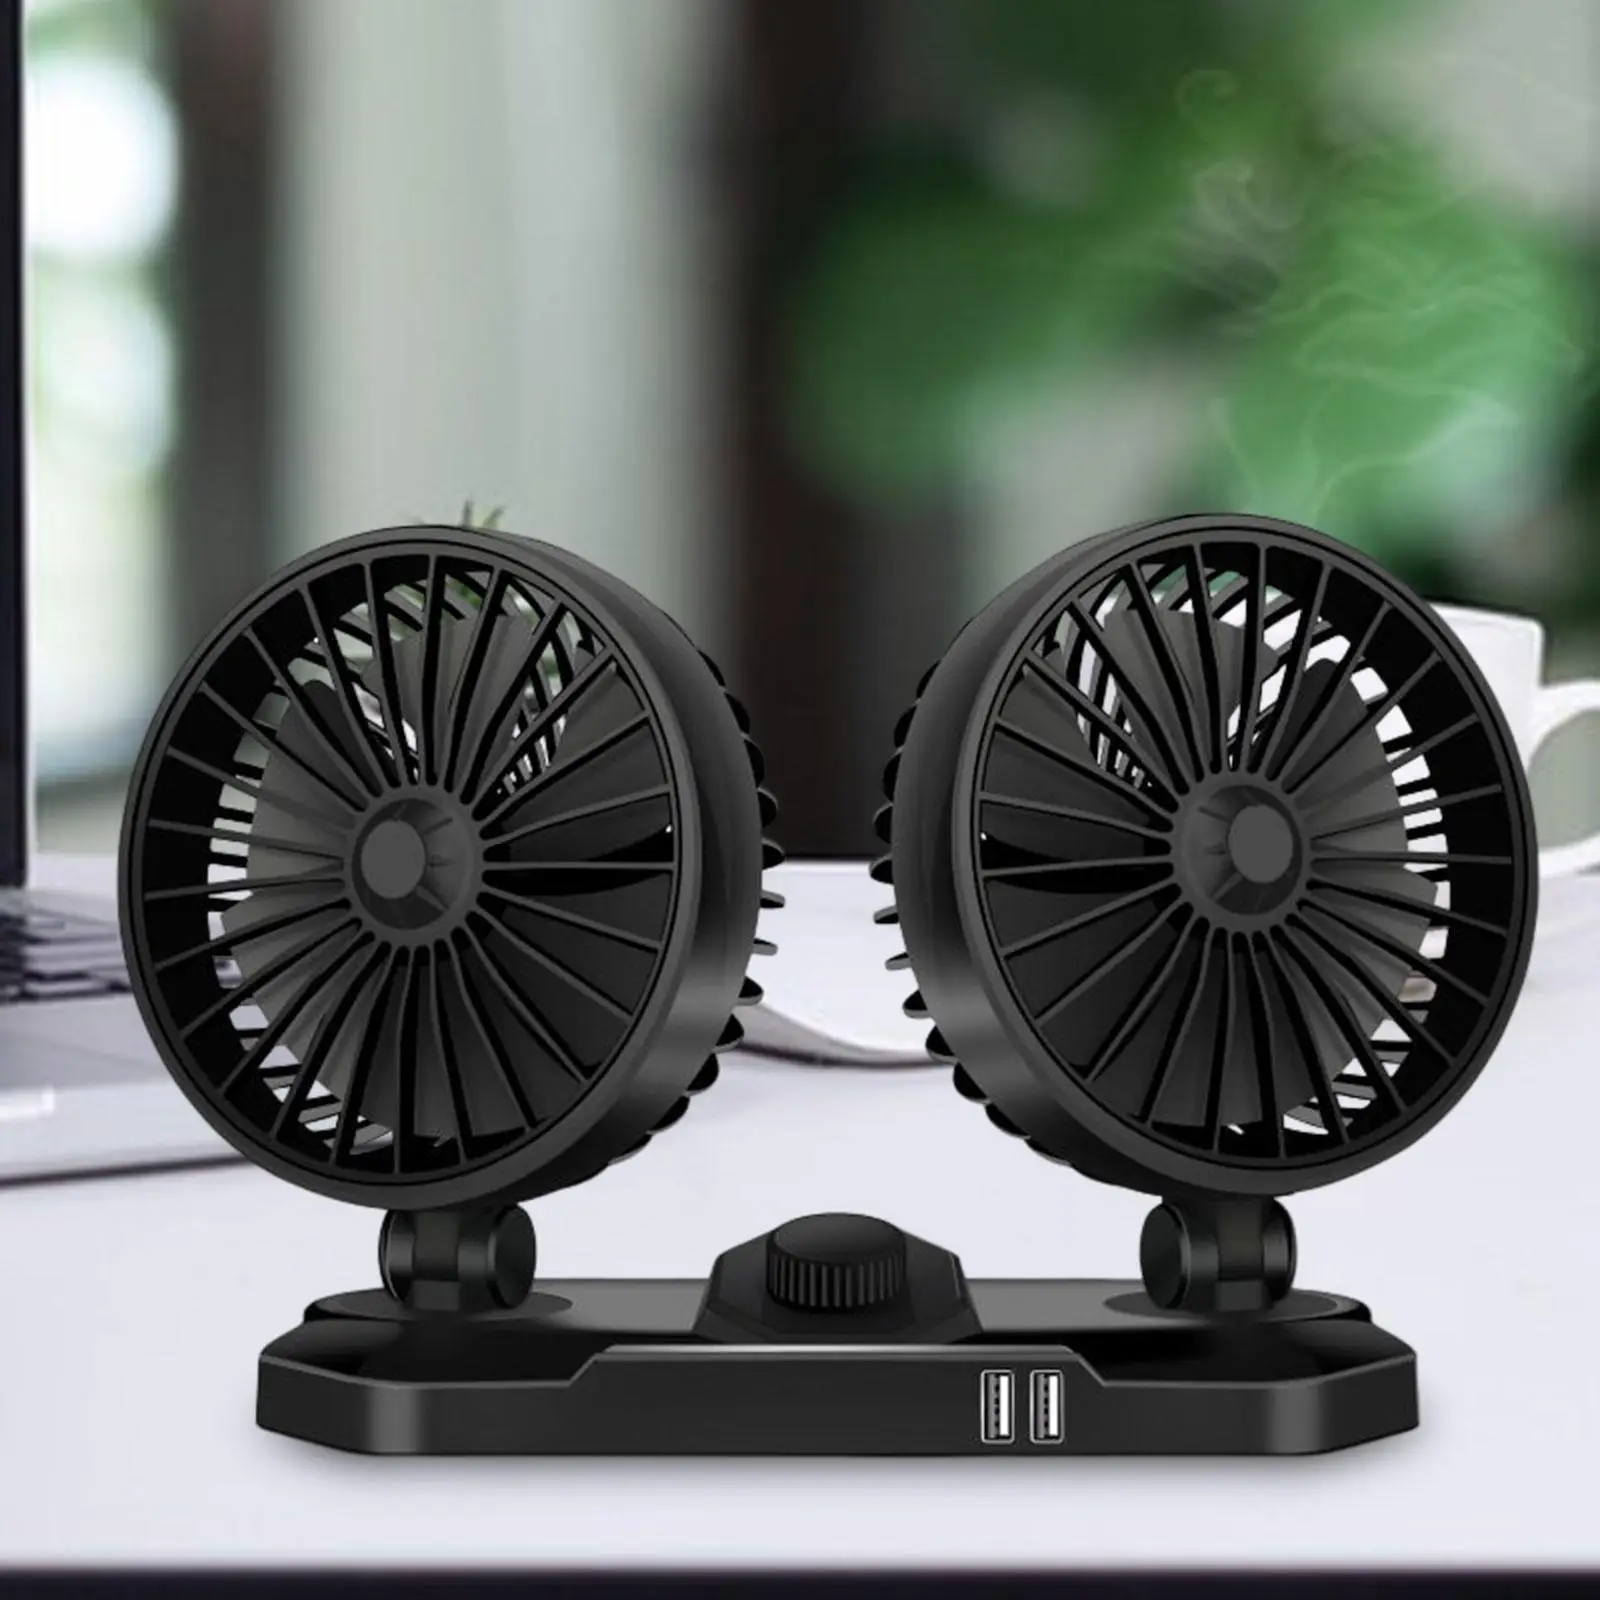 Small Electric Car Cooling Fan Portable 360 Degree Rotatable Personal Low Noise Auto Fan USB for SUV RV Office Desktop Home